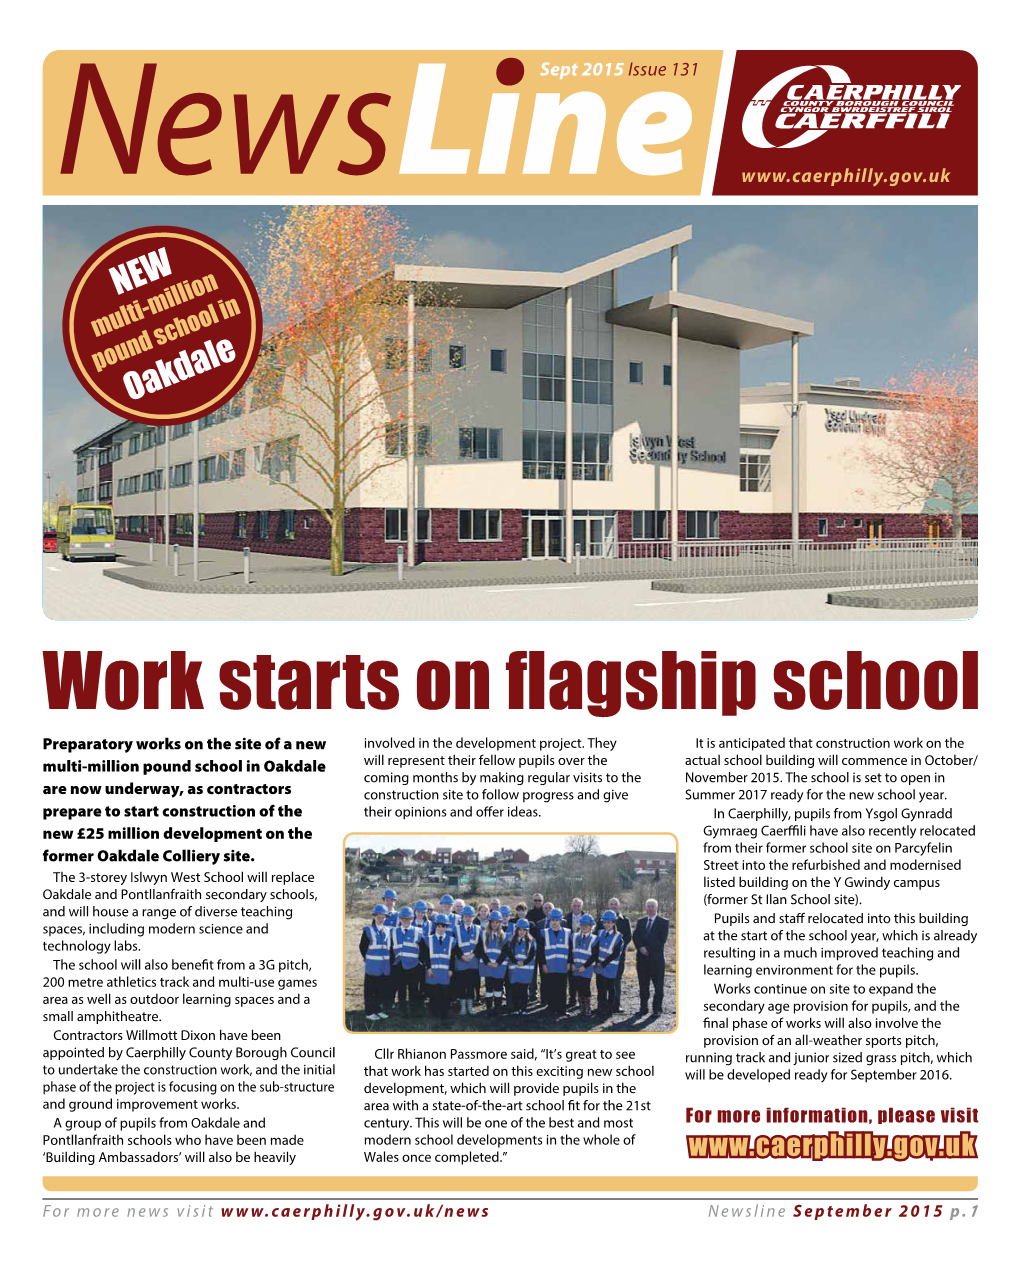 Work Starts on Flagship School Preparatory Works on the Site of a New Involved in the Development Project